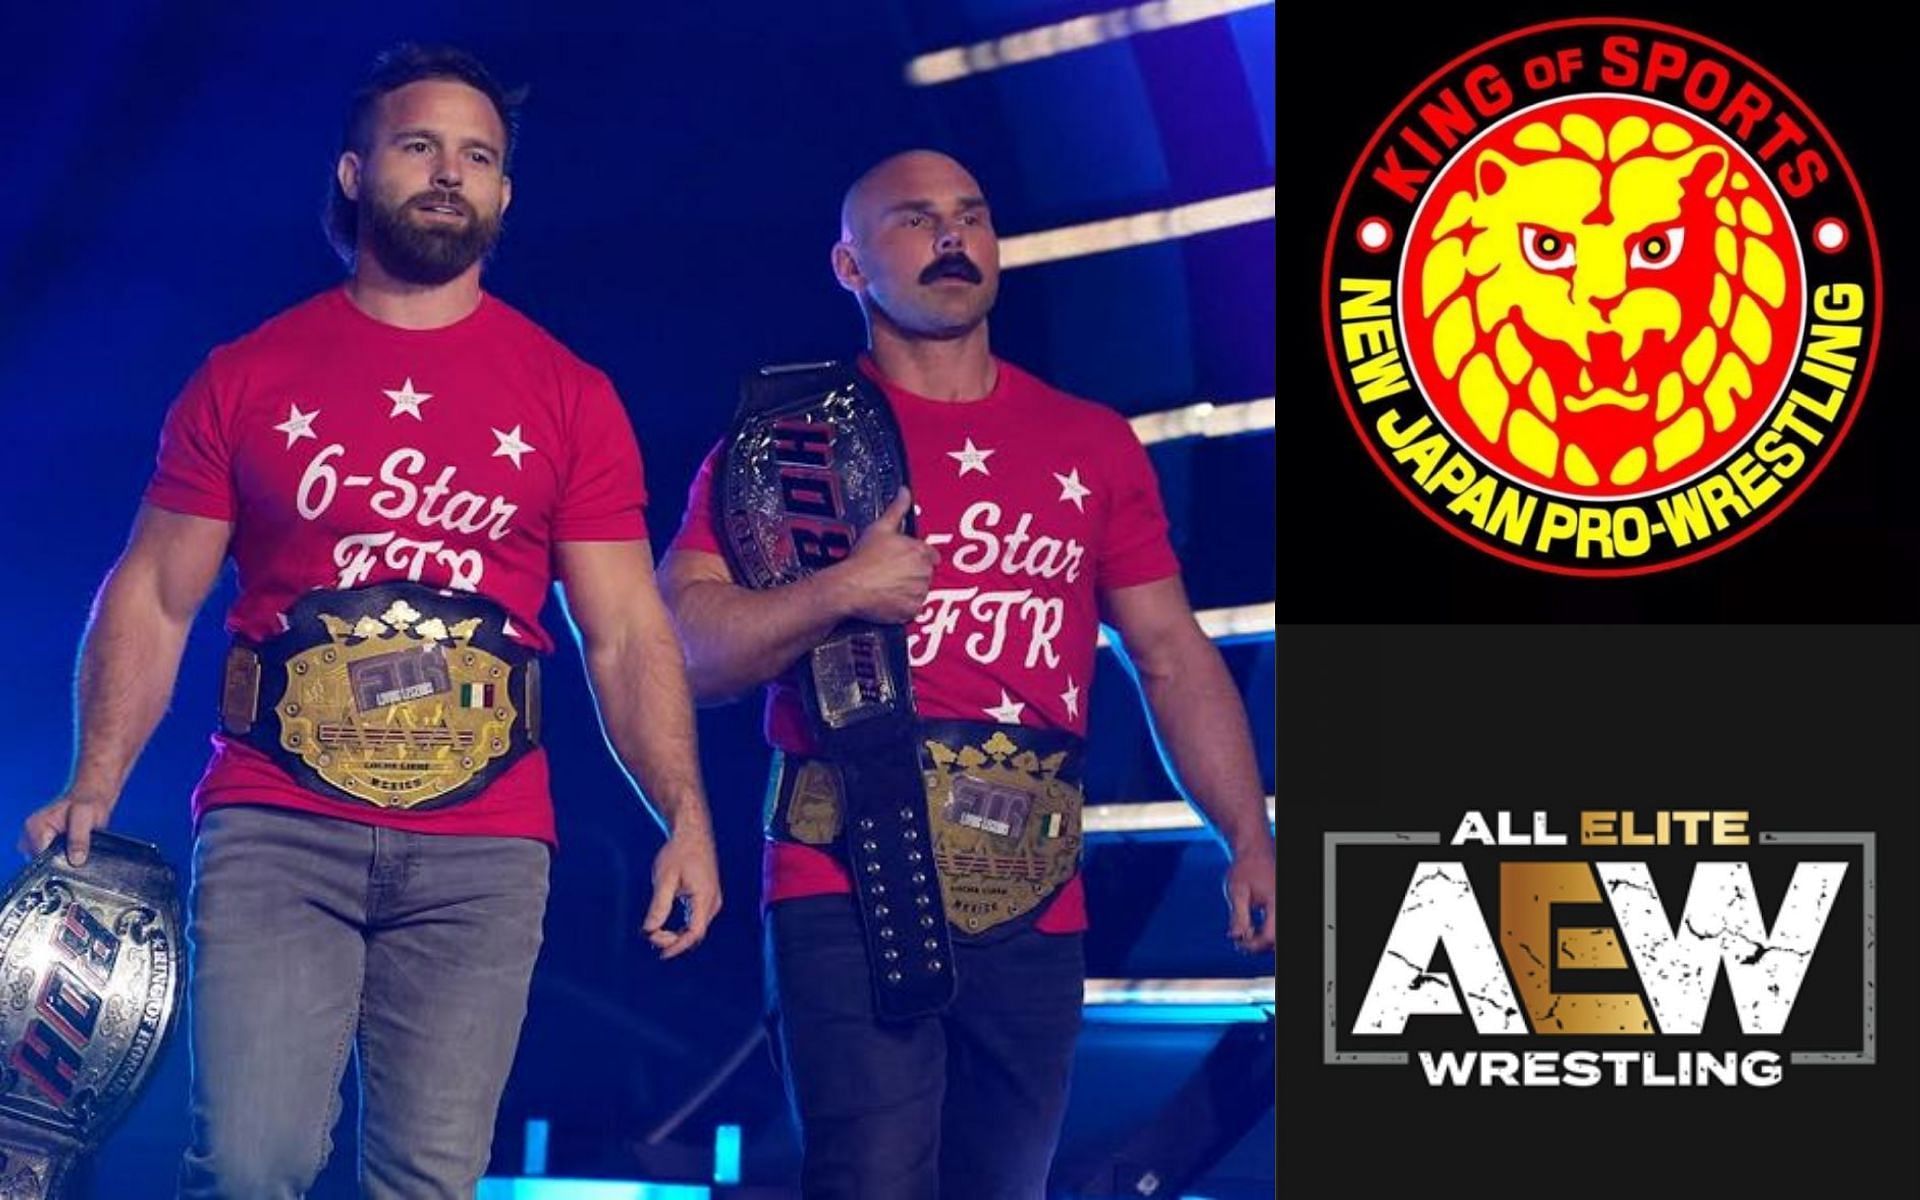 FTR has been feuding with this NJPW faction in the past few weeks now in AEW.